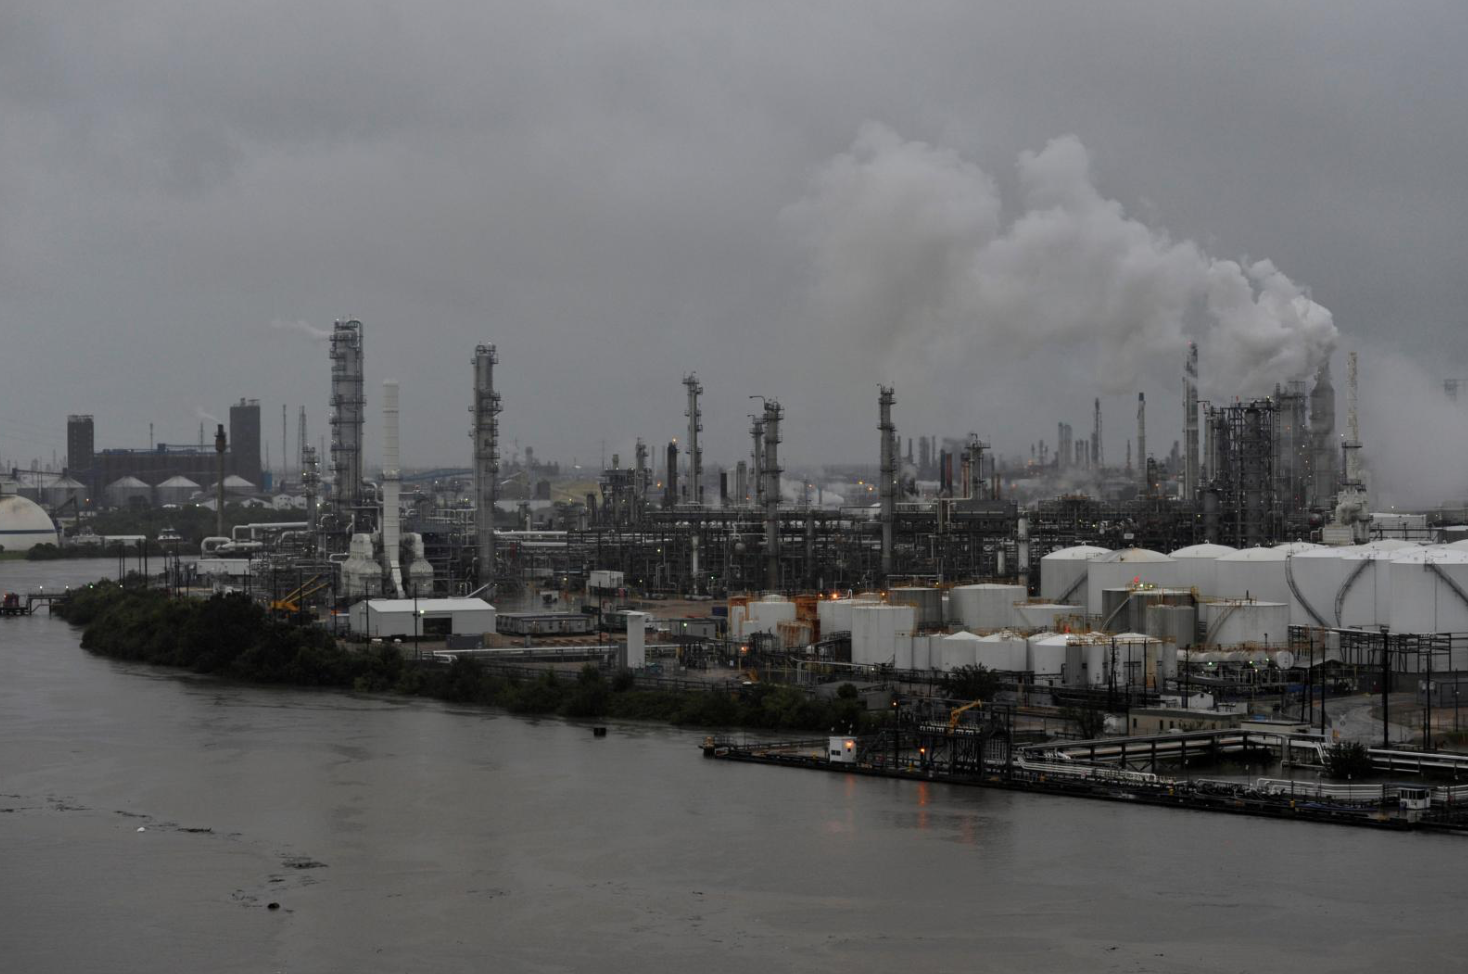 Tropical Storm Harvey Paralyzes Nearly A Fifth of U.S. Oil Refineries